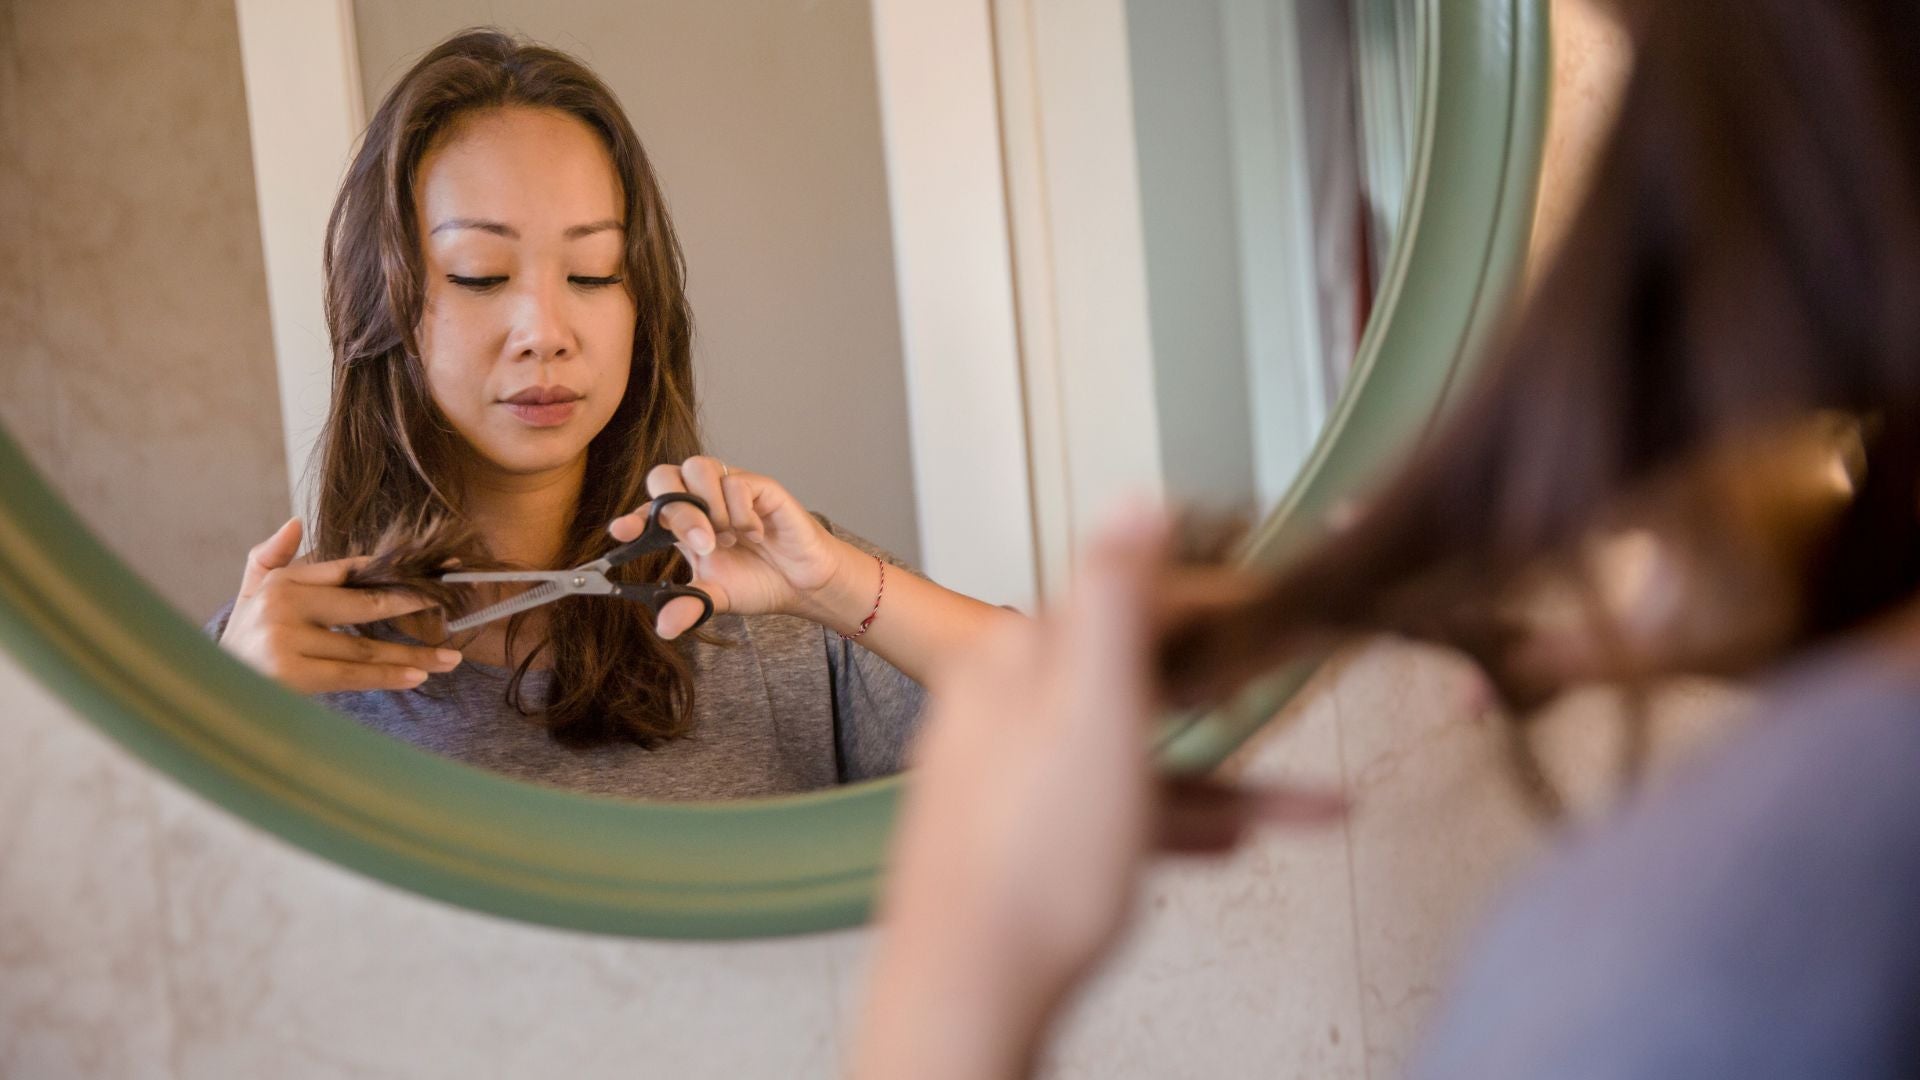 From Bad Haircut to Fabulous: Tips for Fixing a Hair Disaster